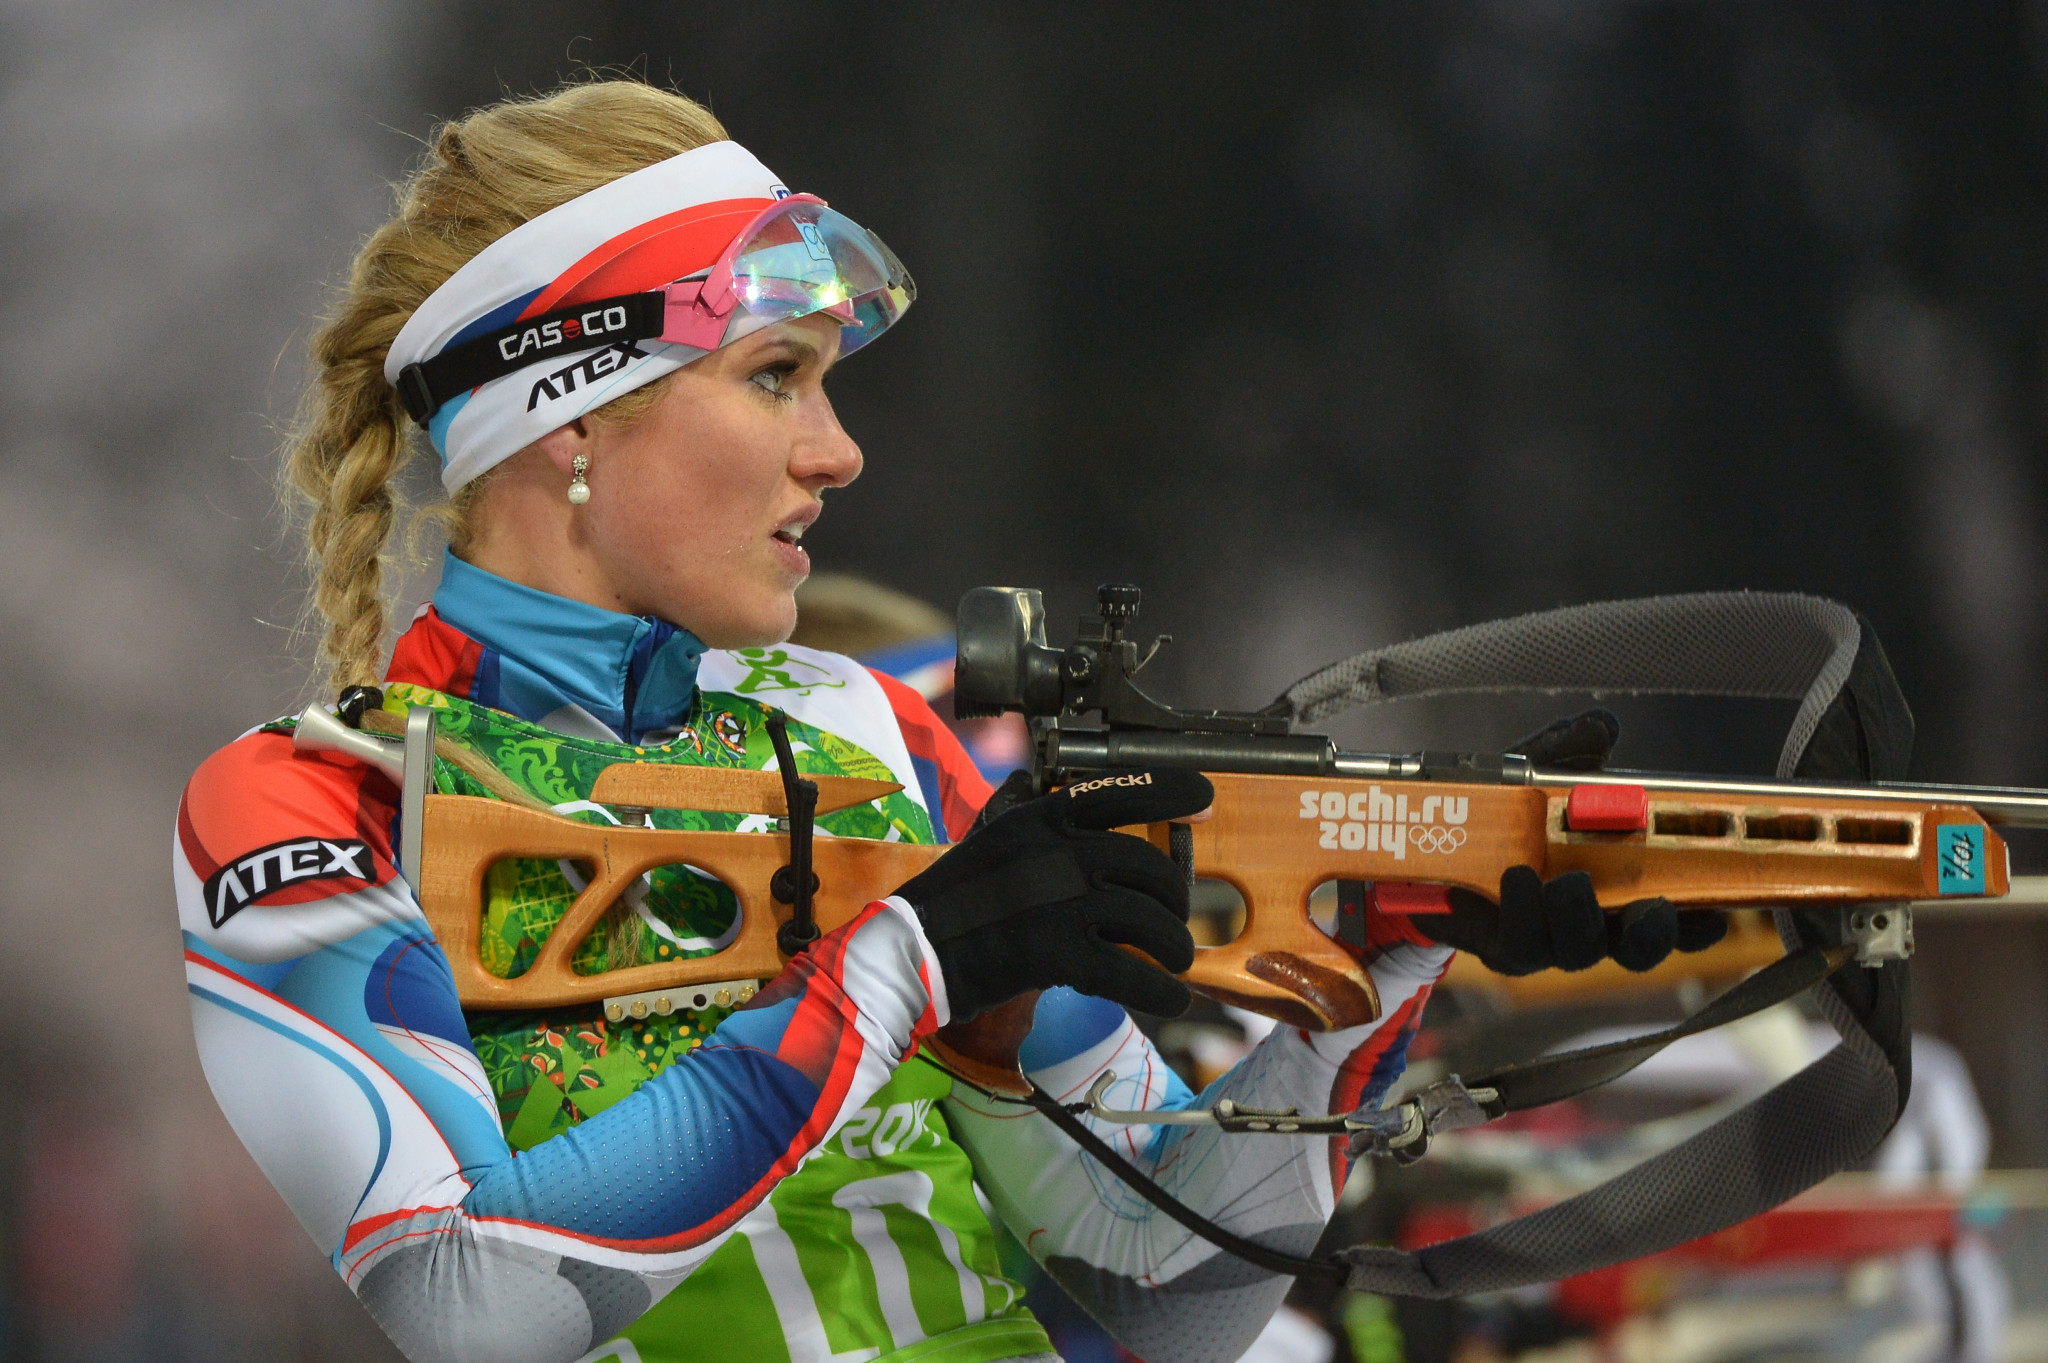 The Czech Republic's team, including Gabriela Soukalová, upgraded to third in the 4x6km women's biathlon at Sochi 2014 will finally receive their bronze medals at a special ceremony in Nové Město on Saturday ©Getty Images